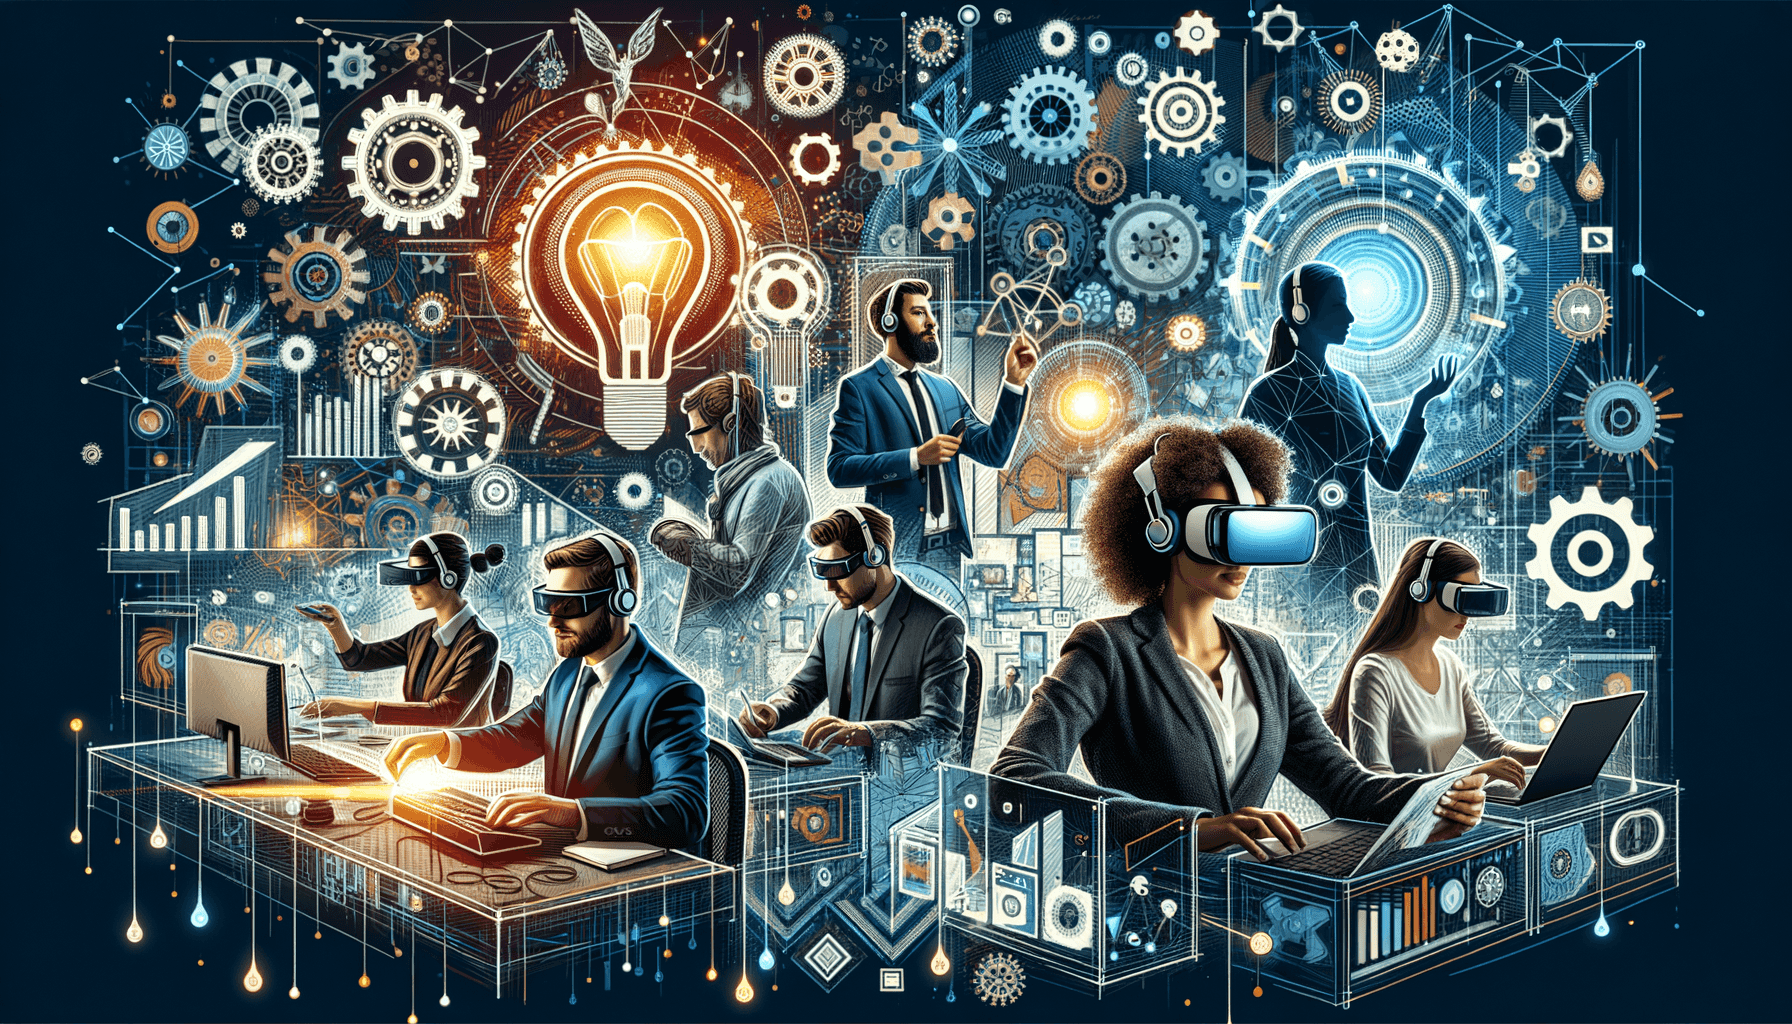 "Experience the Future of Business with Gravity Jack's VR Solutions – Revolutionizing Training, Design, and Marketing for Unmatched Innovation and Productivity."